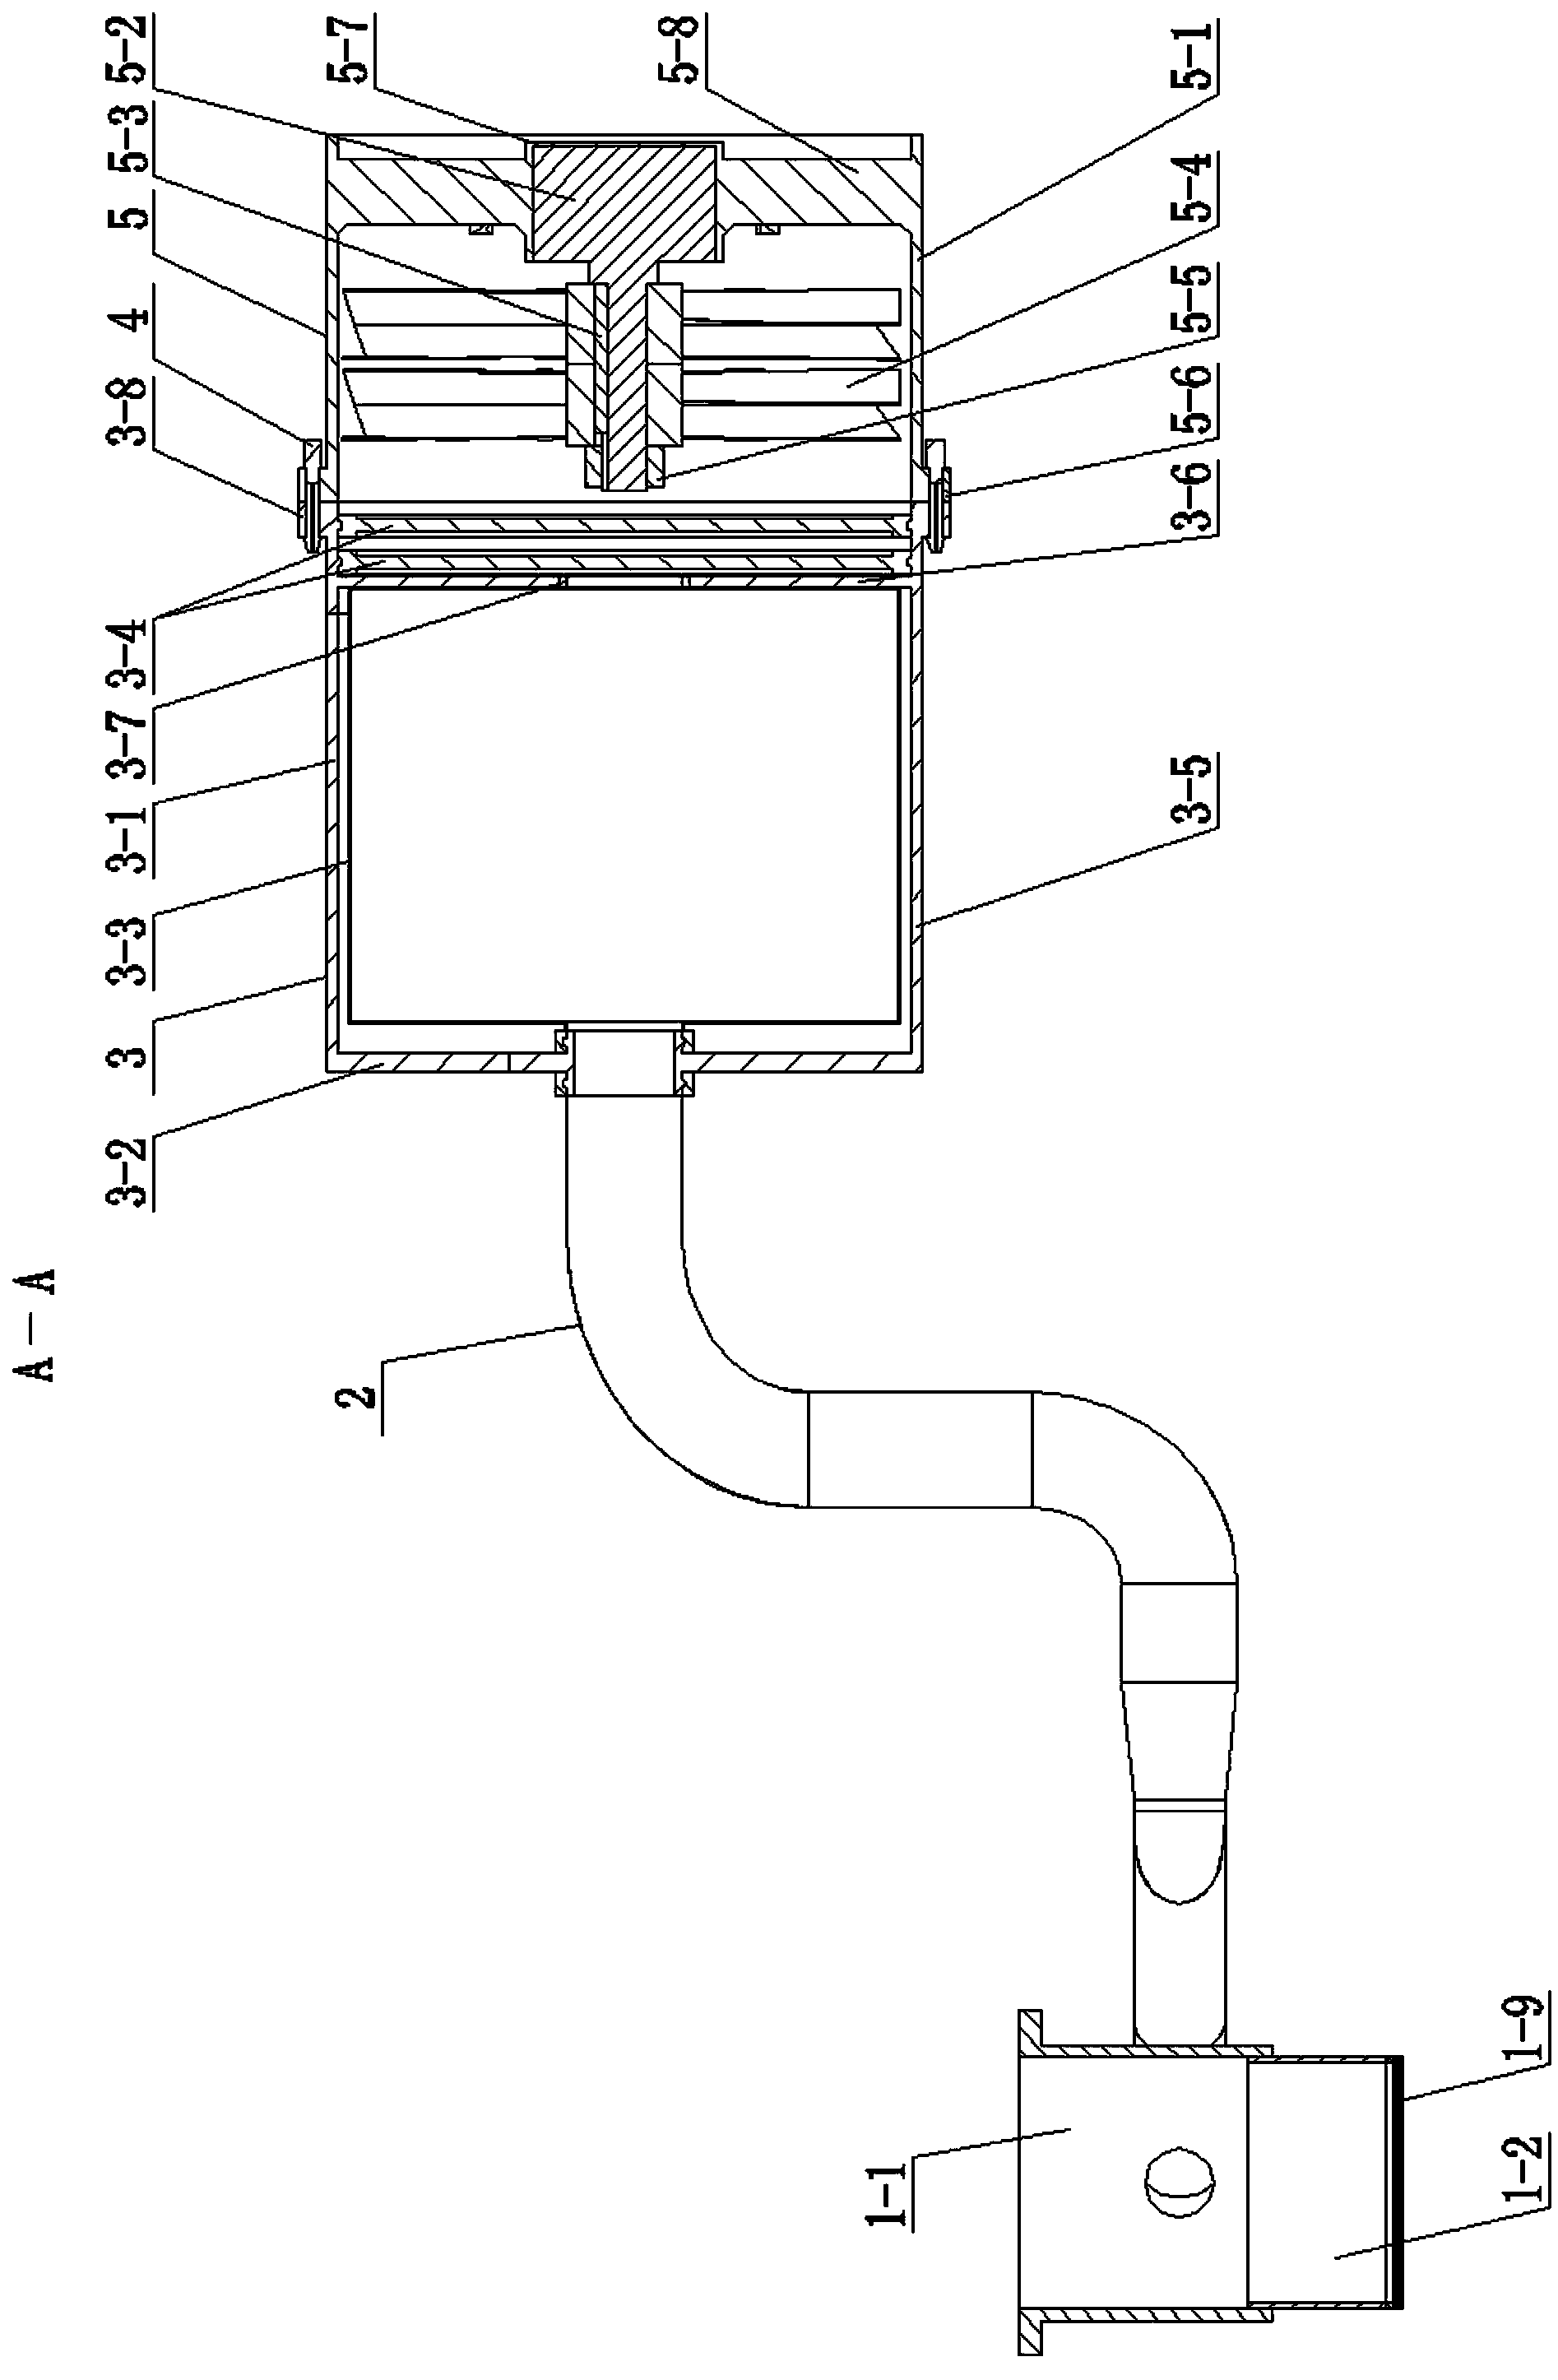 Removed material collecting and dust removing system during drilling process of carbon fiber composite material